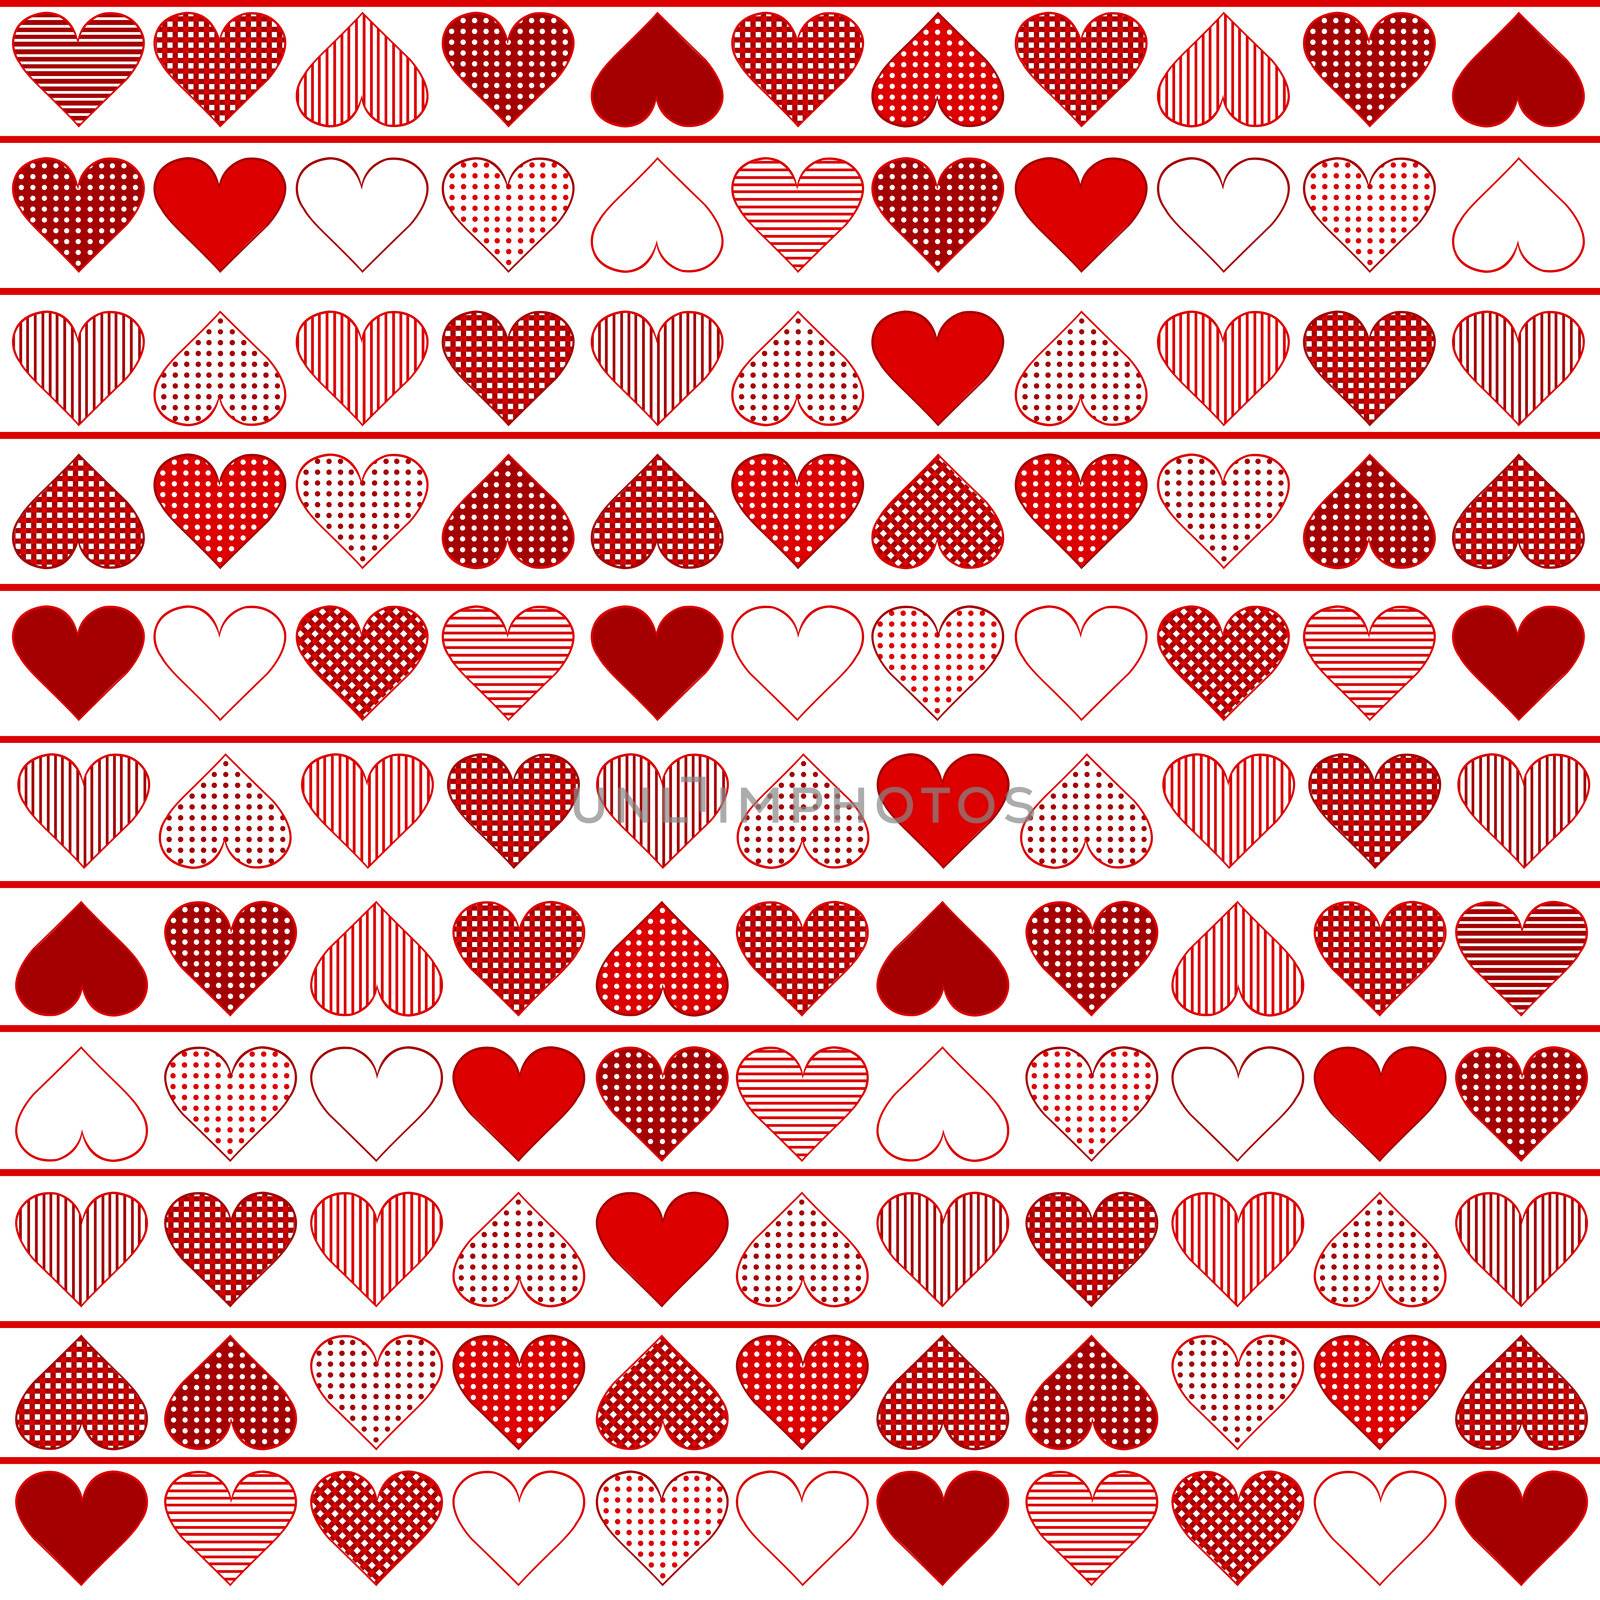 Background pattern with red hearts by hibrida13